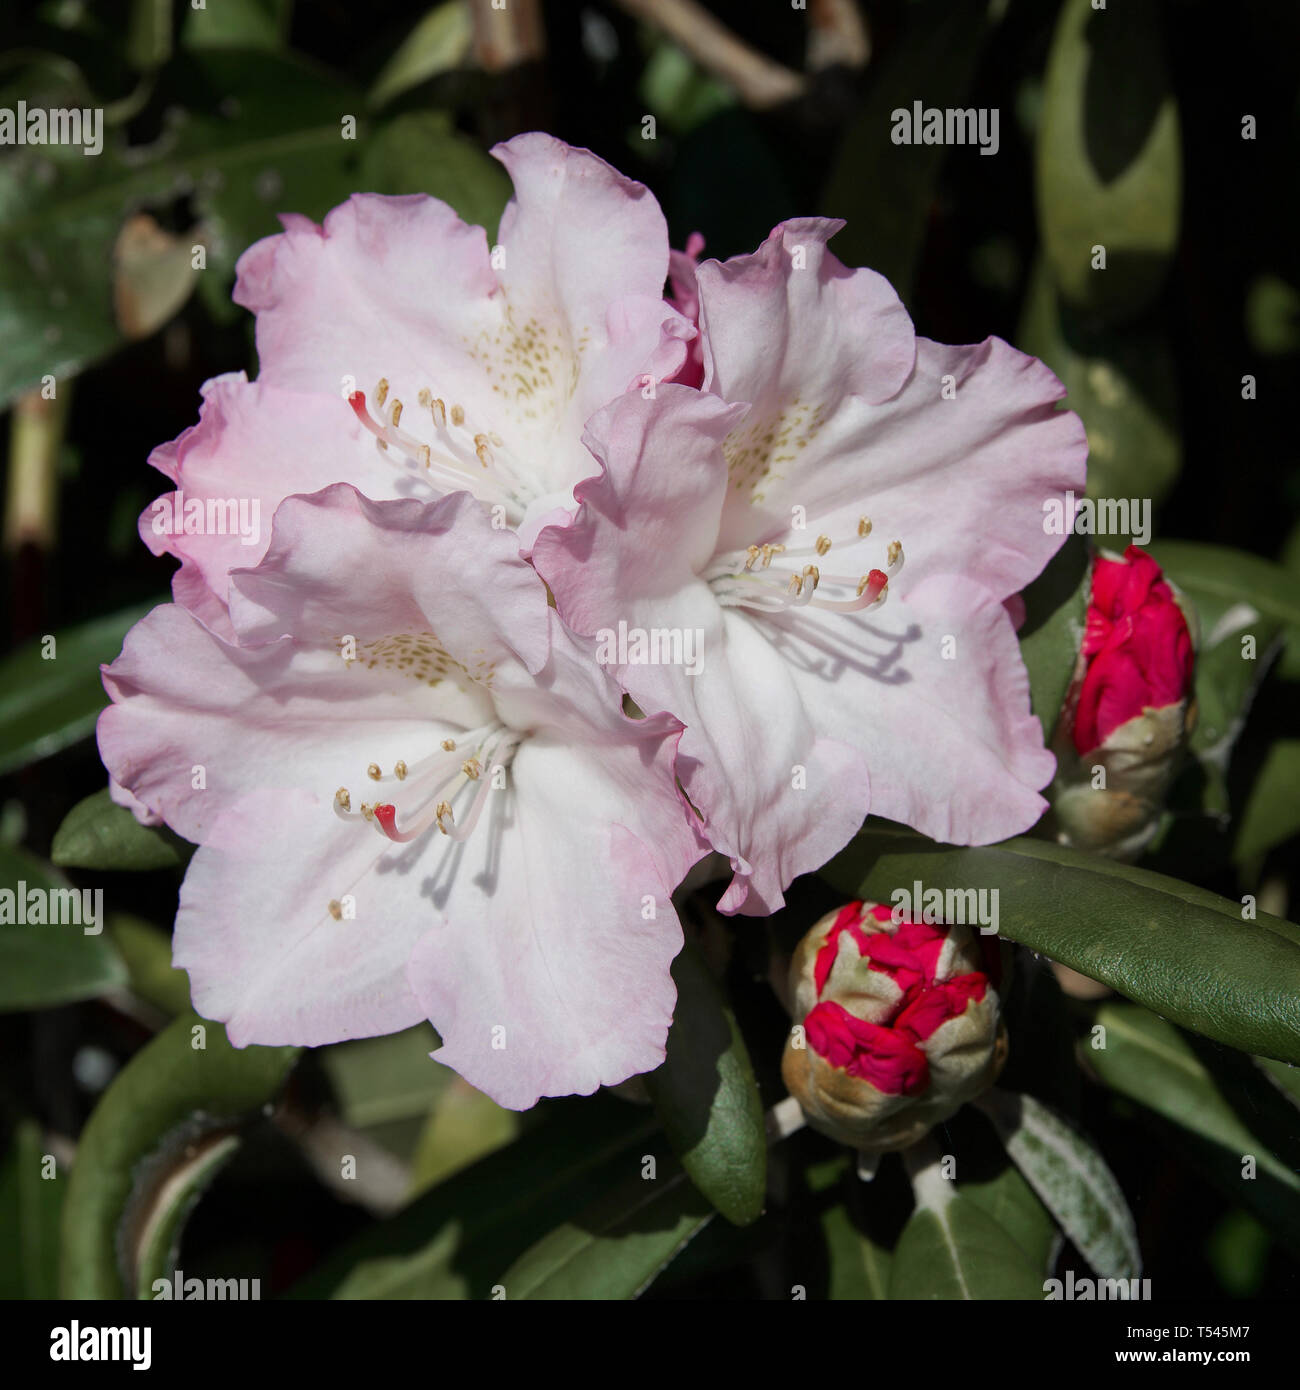 Closeup of a a cluster of pink rhododendron flowers and two buds on the tree. Stock Photo